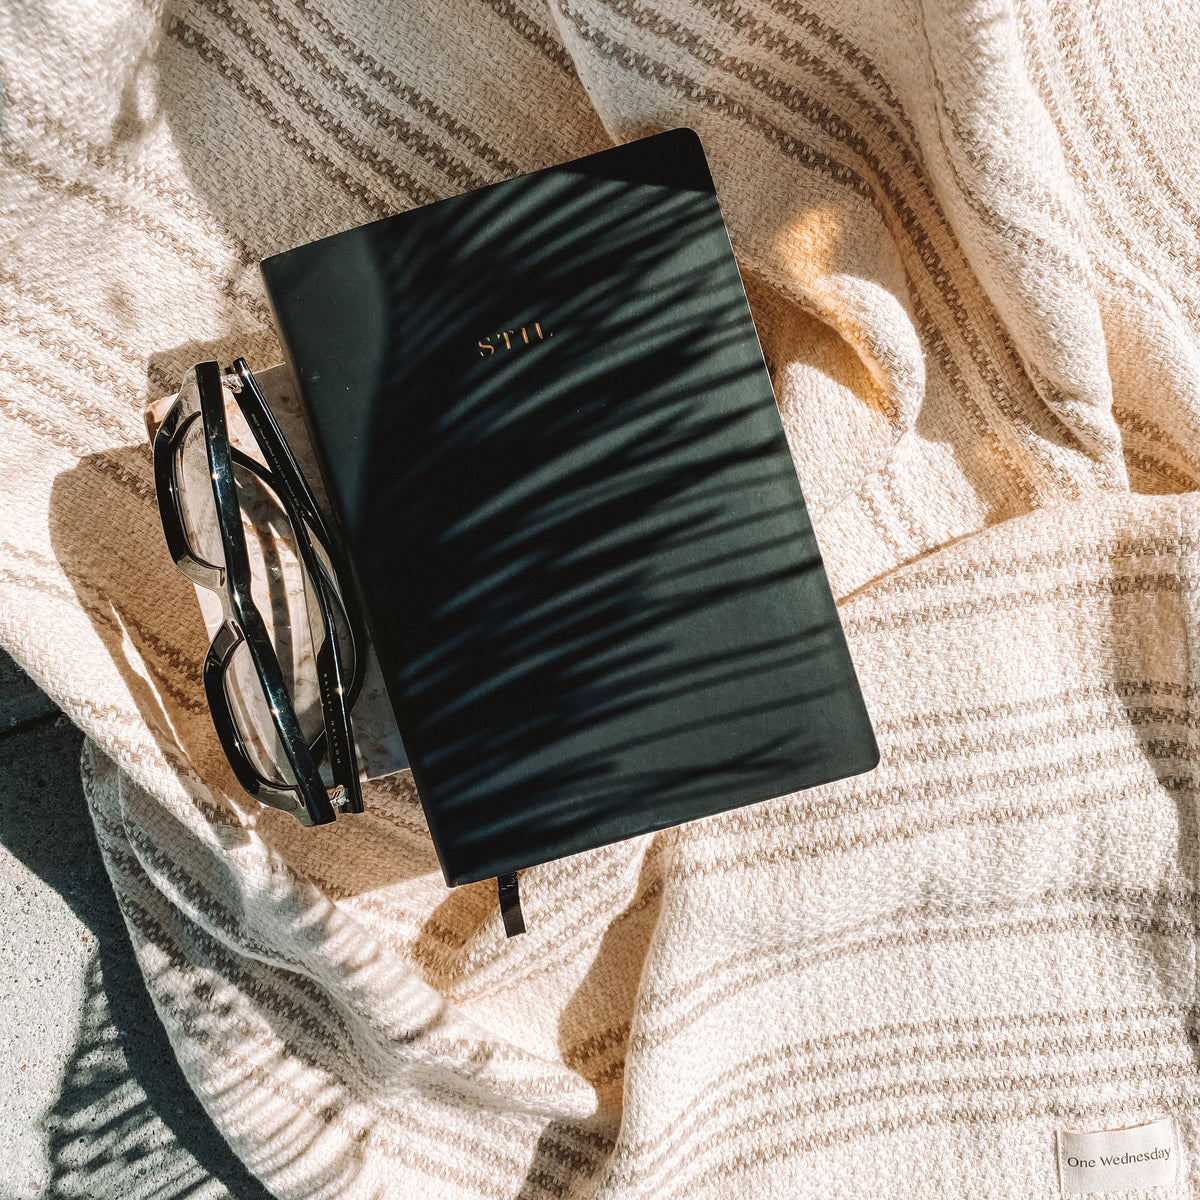 A black STIL planner backdropped by a beige striped blanket, next to a pair of glasses. 